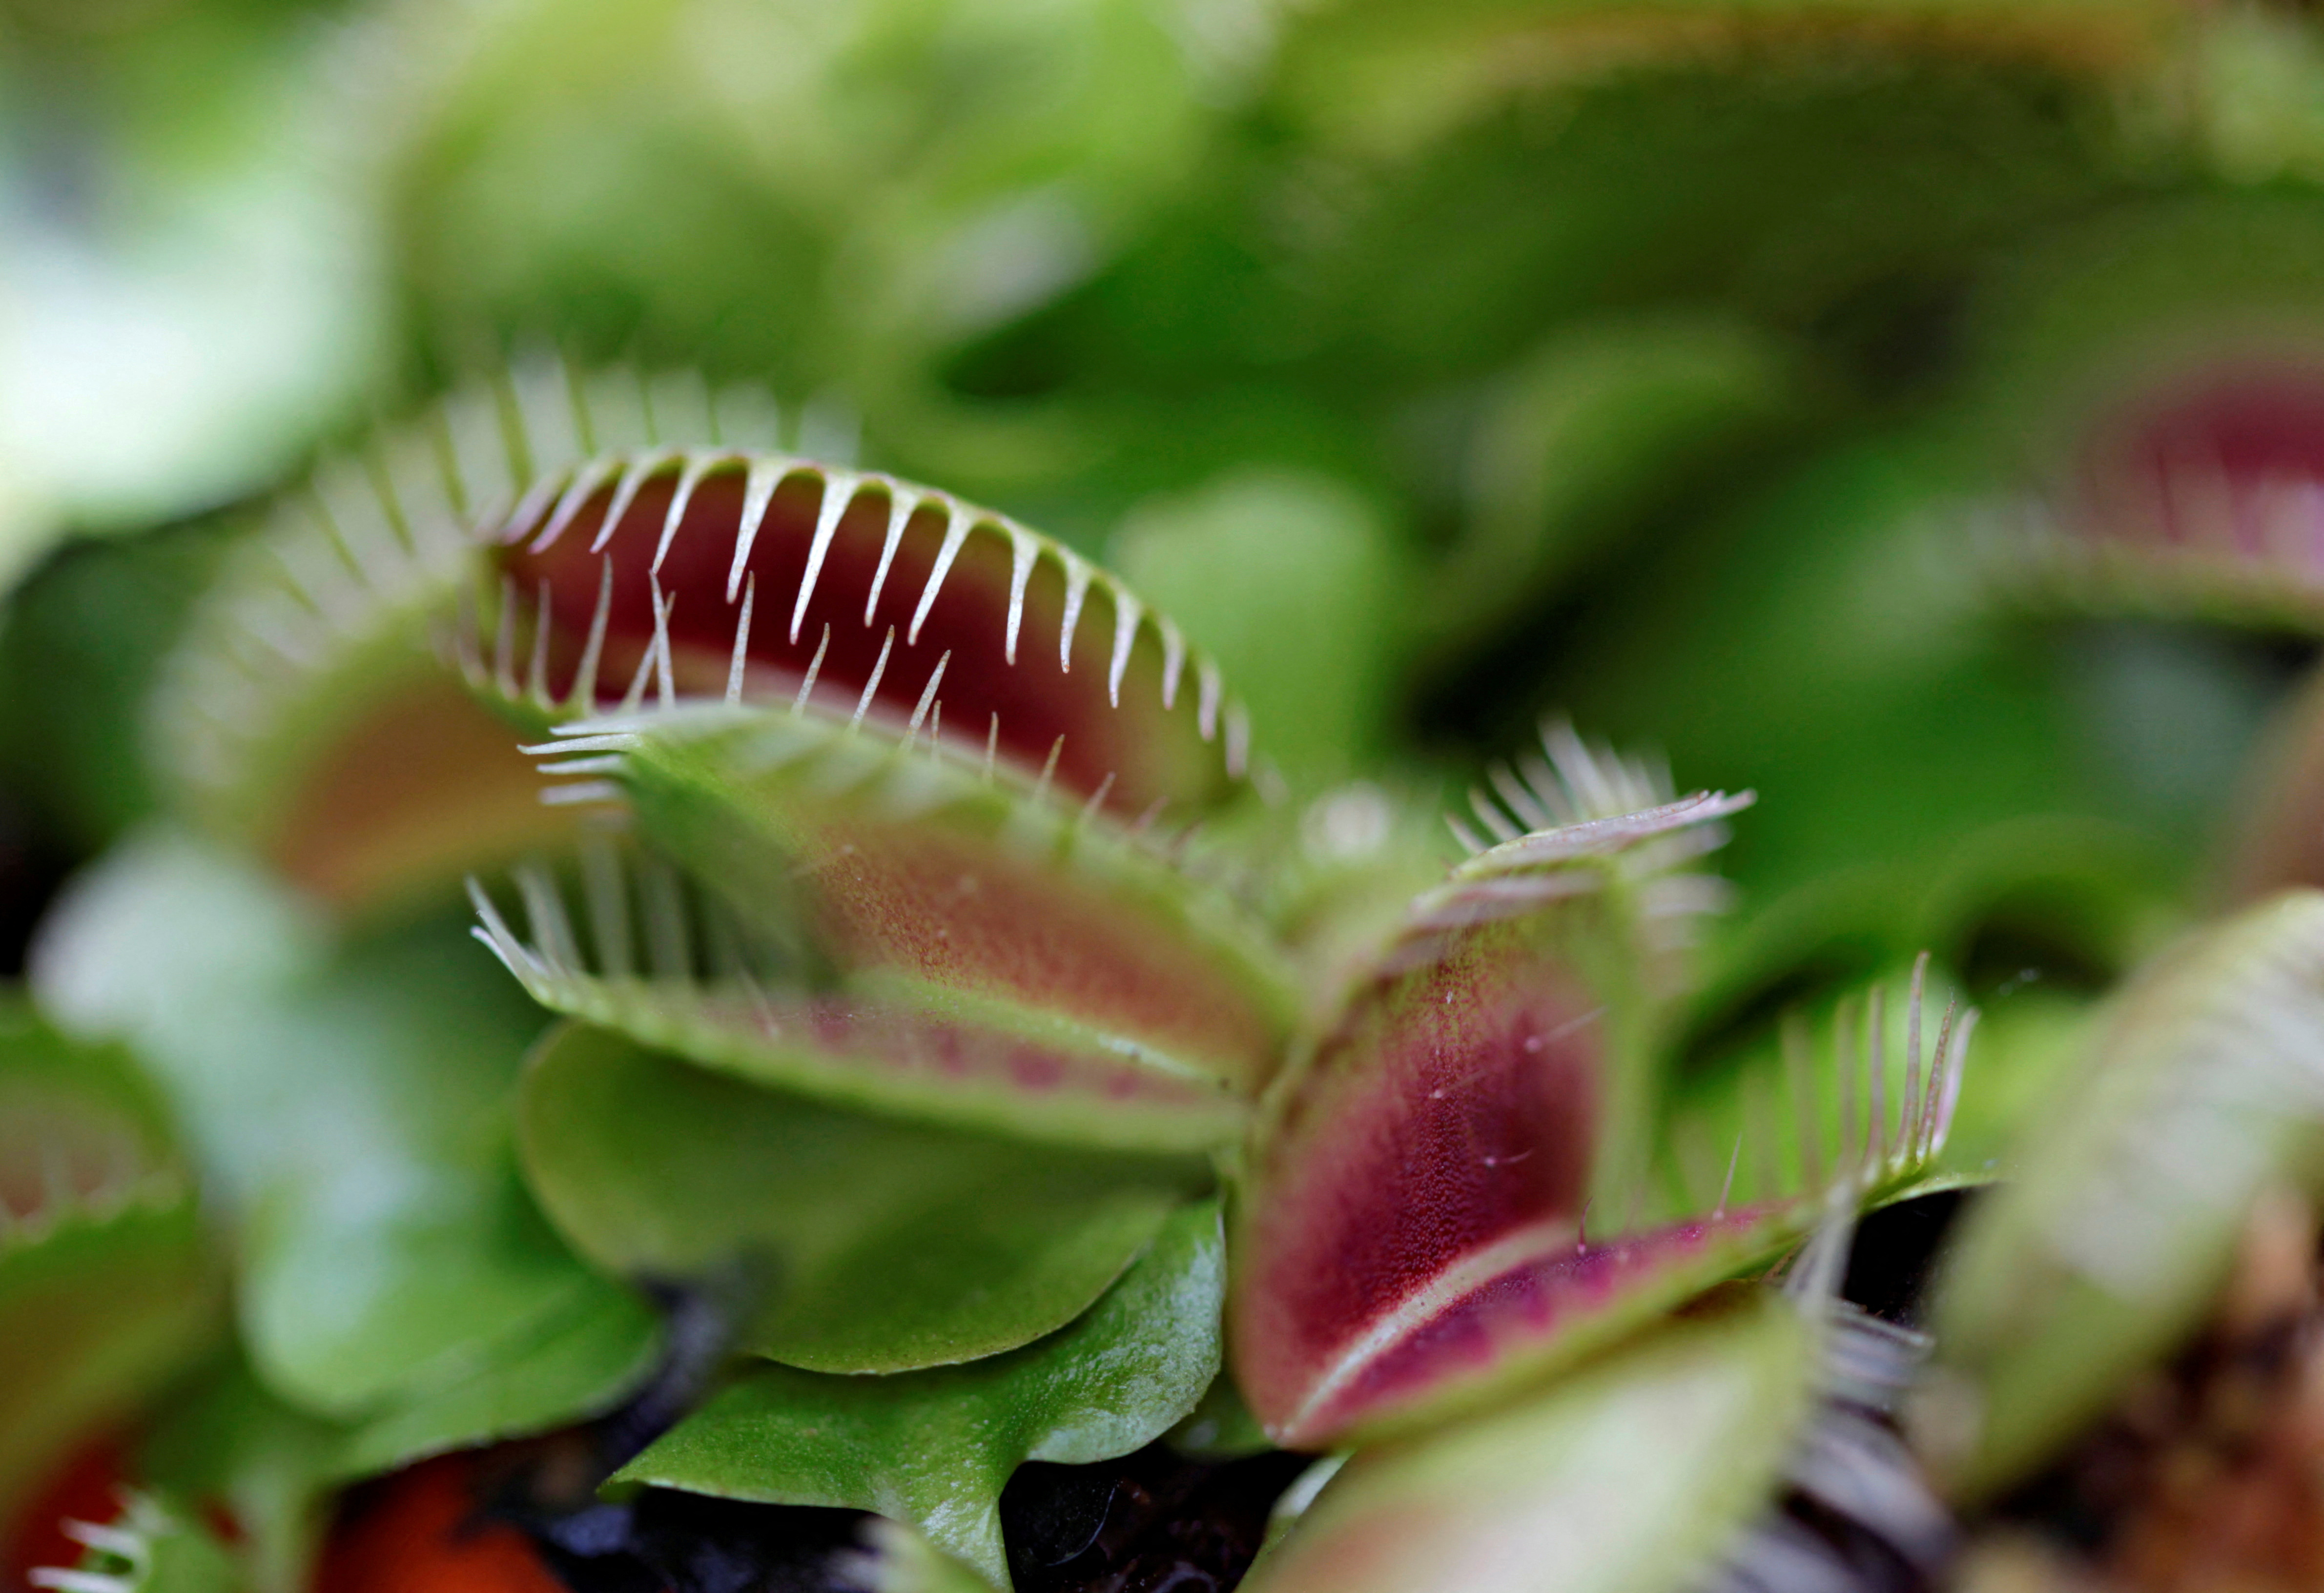 A Venus flytrap is seen at the meat-eating plant exhibition "Dejate Atrapar" (Let Yourself Get Caught), in Bogota